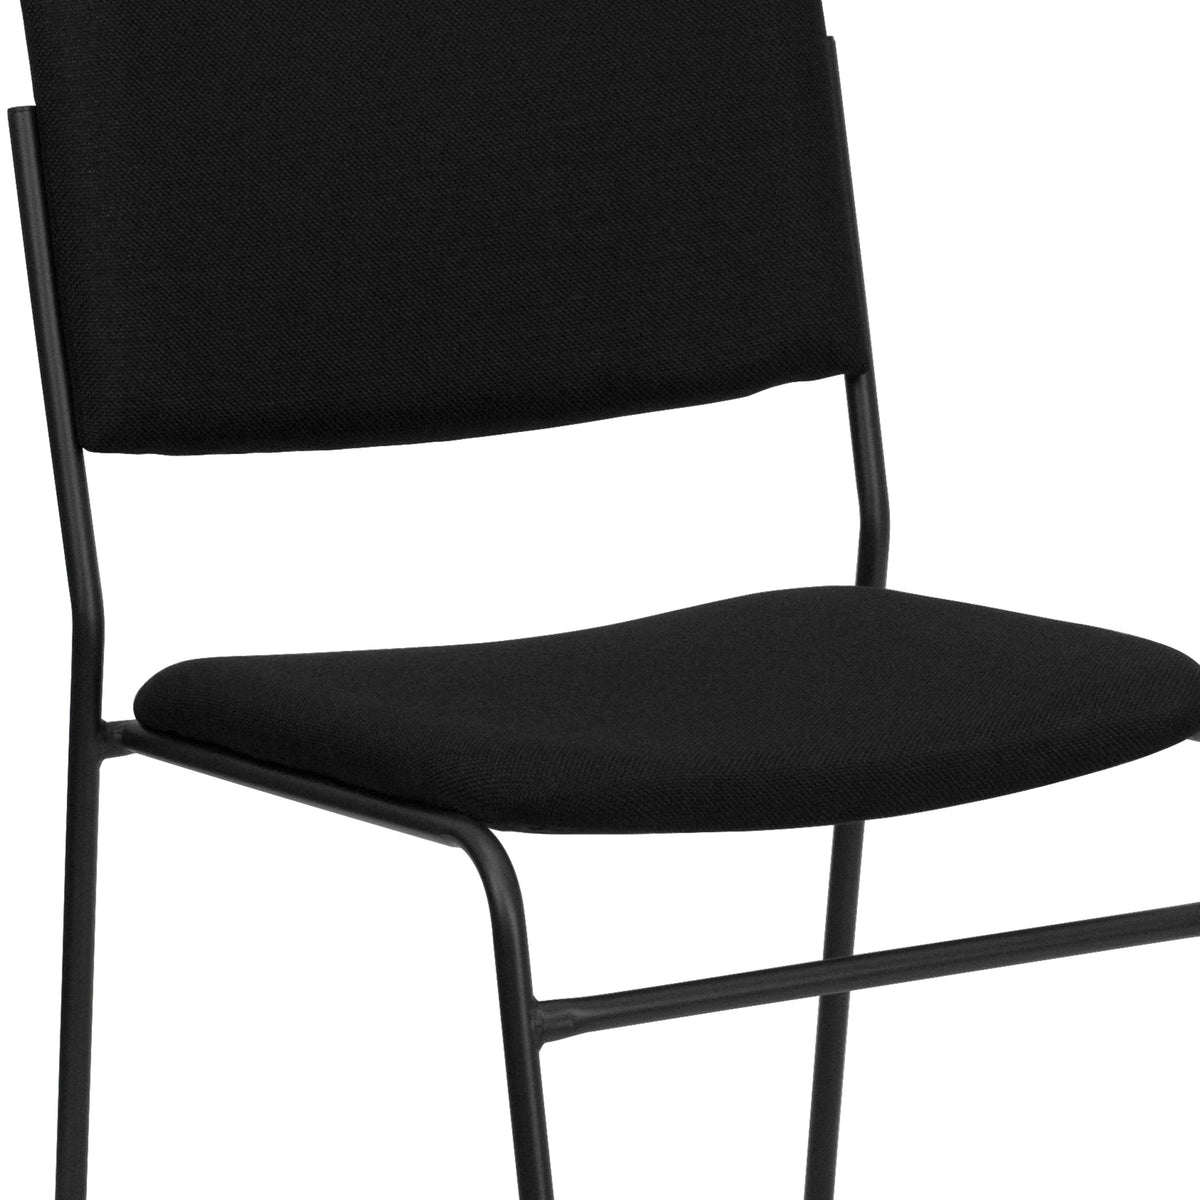 Black Fabric/Black Frame |#| 500 lb. Capacity High Density Black Fabric Stacking Chair with Sled Base